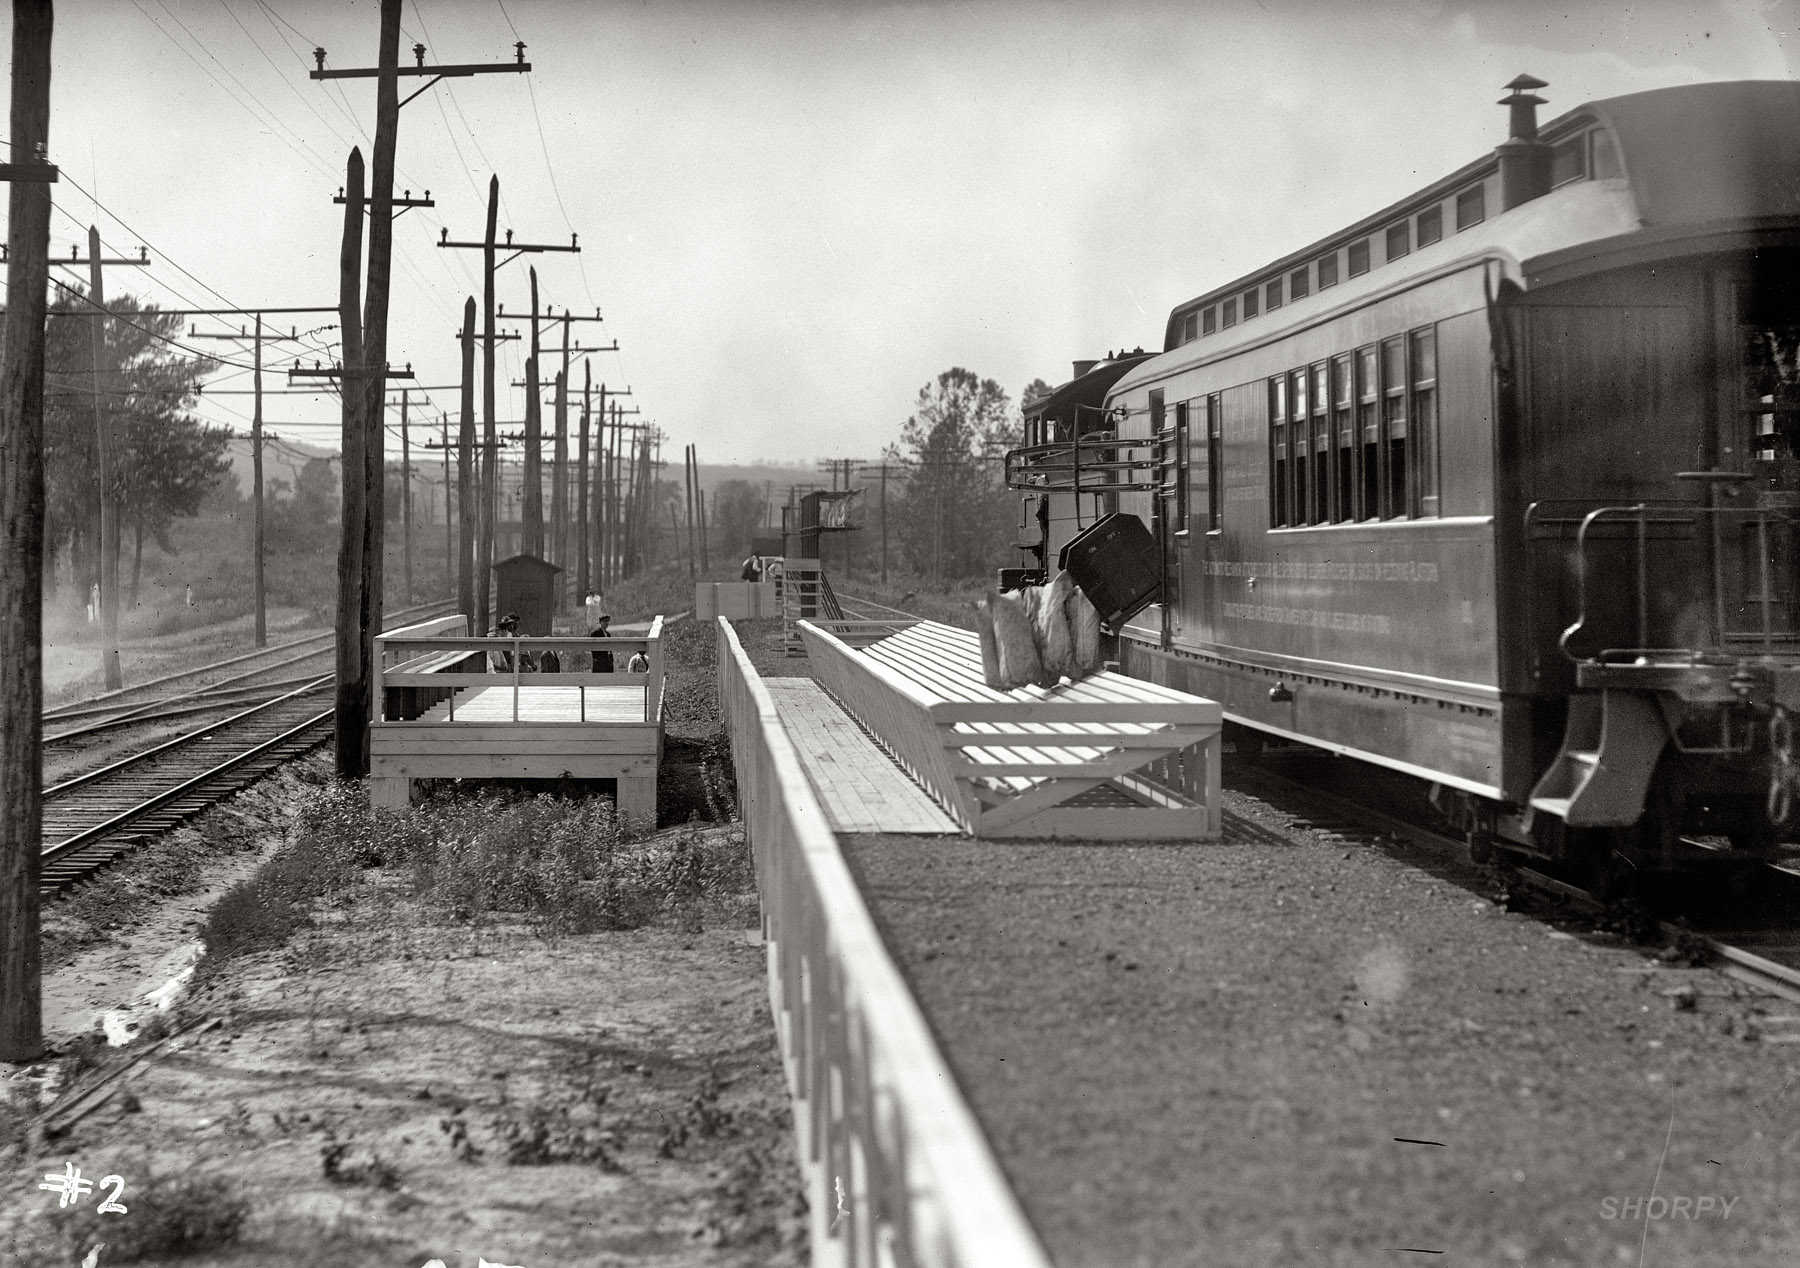 "Post Office Dept. Hupp Auto Railway Service." The download part of the Hupp mail-transfer system. Harris & Ewing Collection glass negative. View full size.